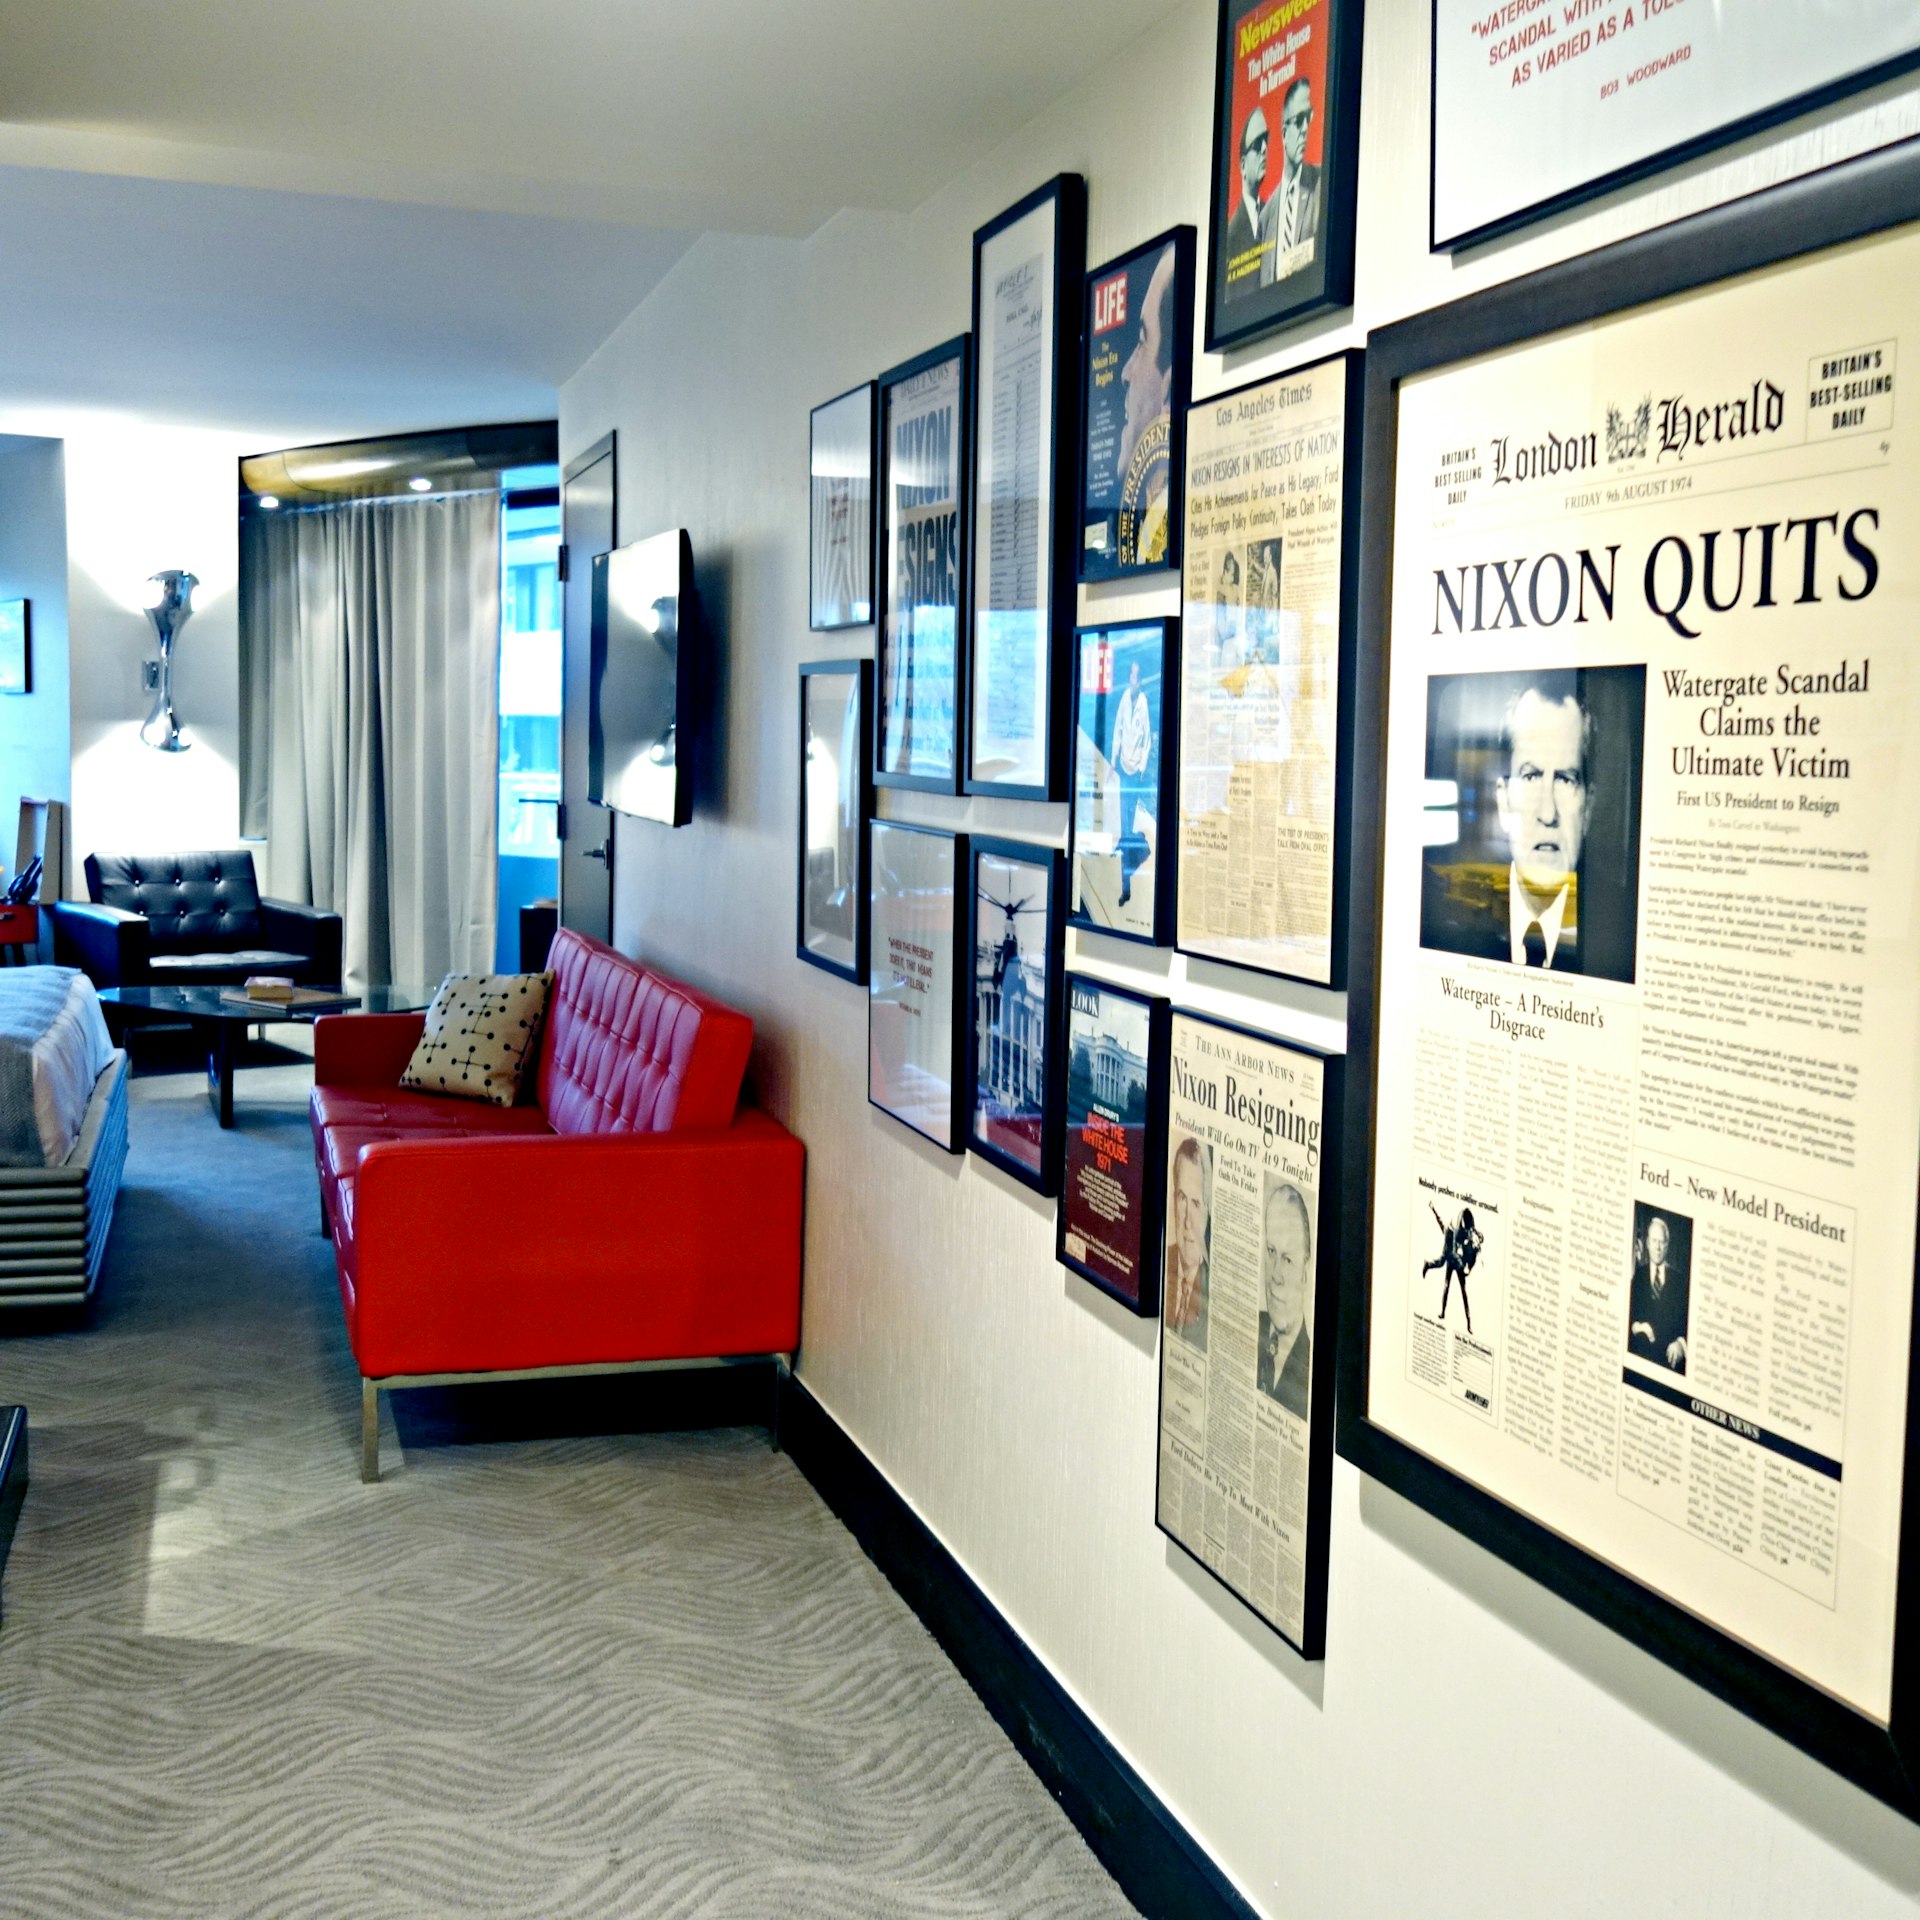 A room with a large framed newspaper page mounted on the wall. The headline says "Nixon quits"